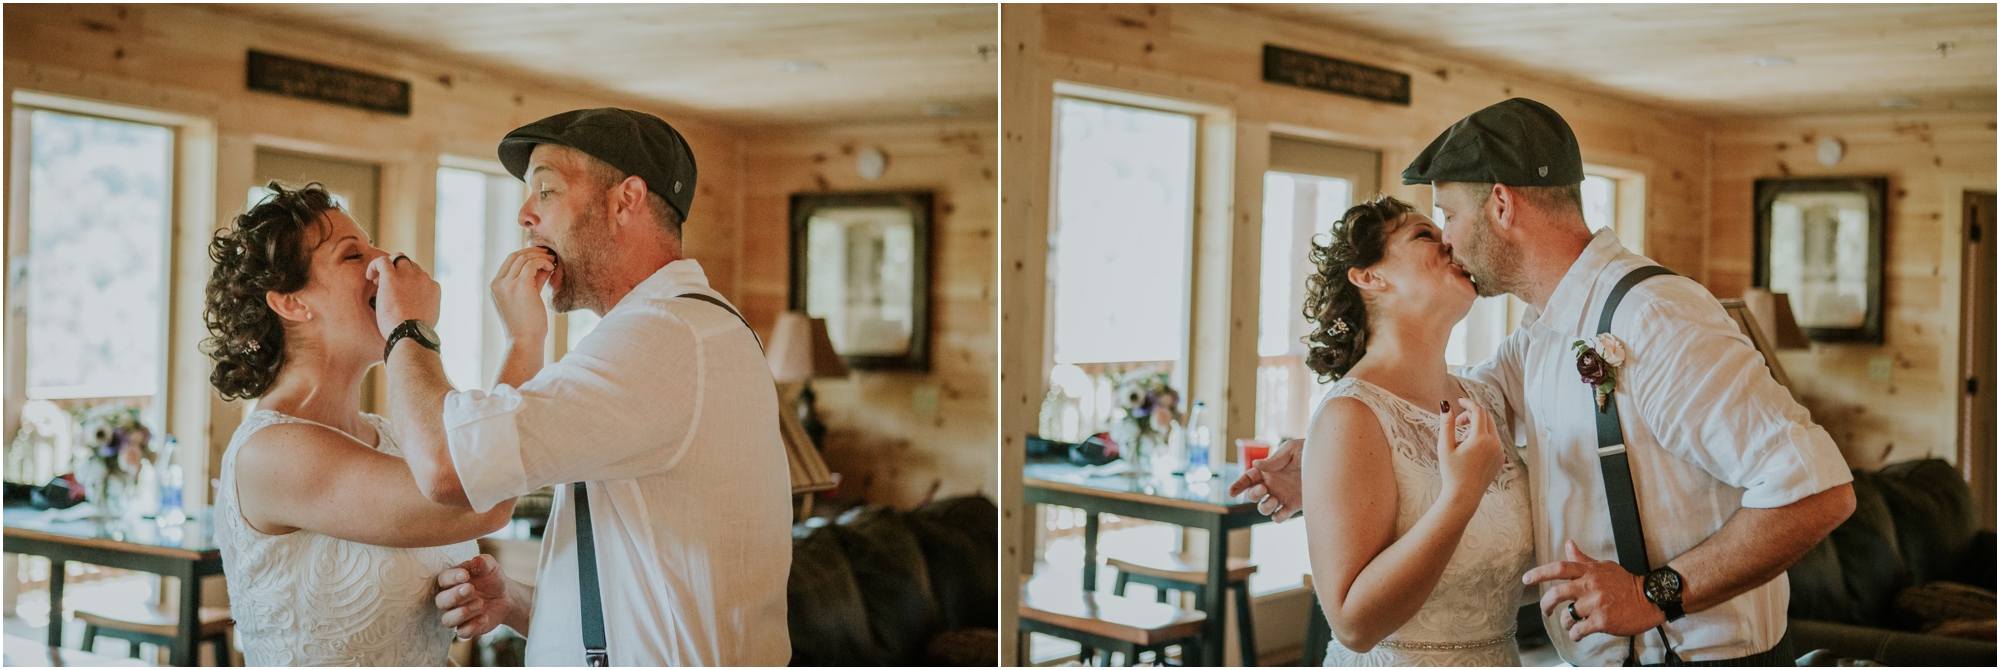 cabin-parkside-resort-the-magnolia-venue-tennessee-mountain-views-intimate-wedding_0166.jpg